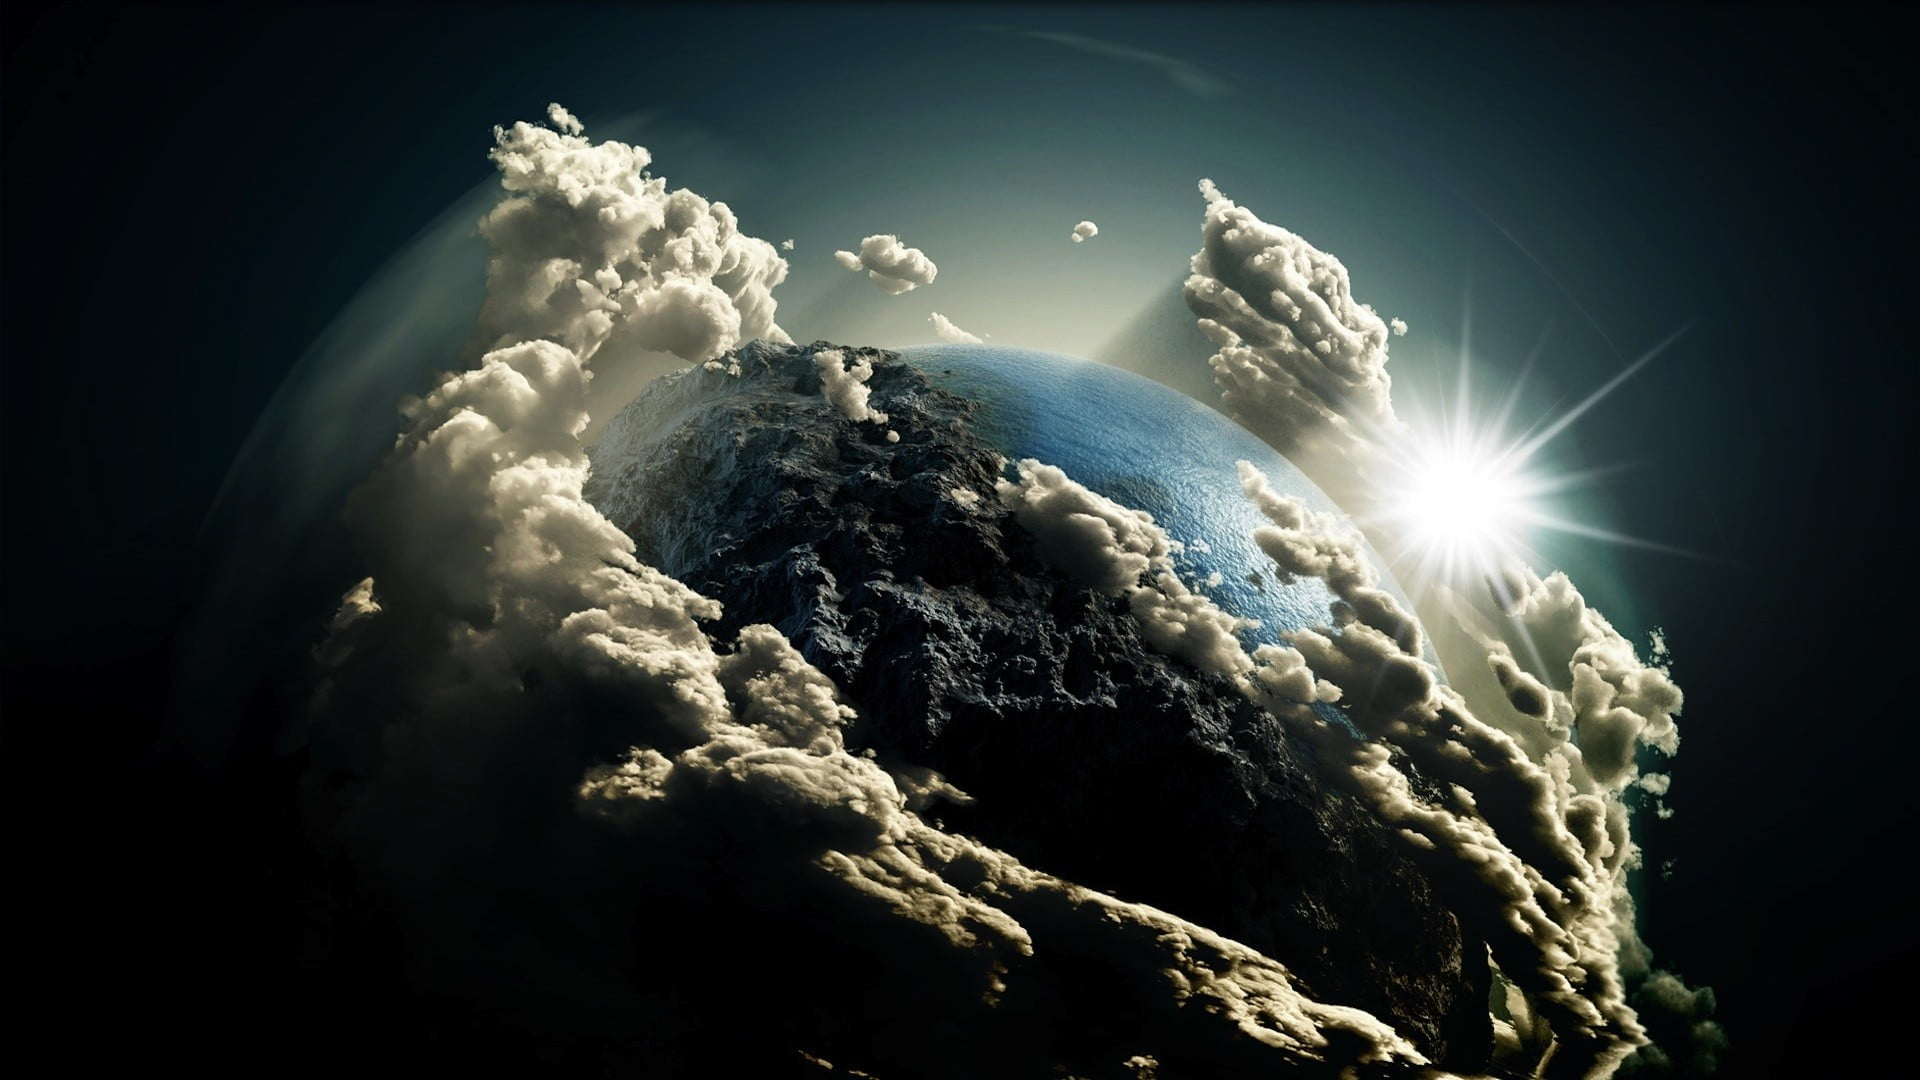 Earth covered with clouds wallpaper, untitled, Sun, artwork, photo manipulation